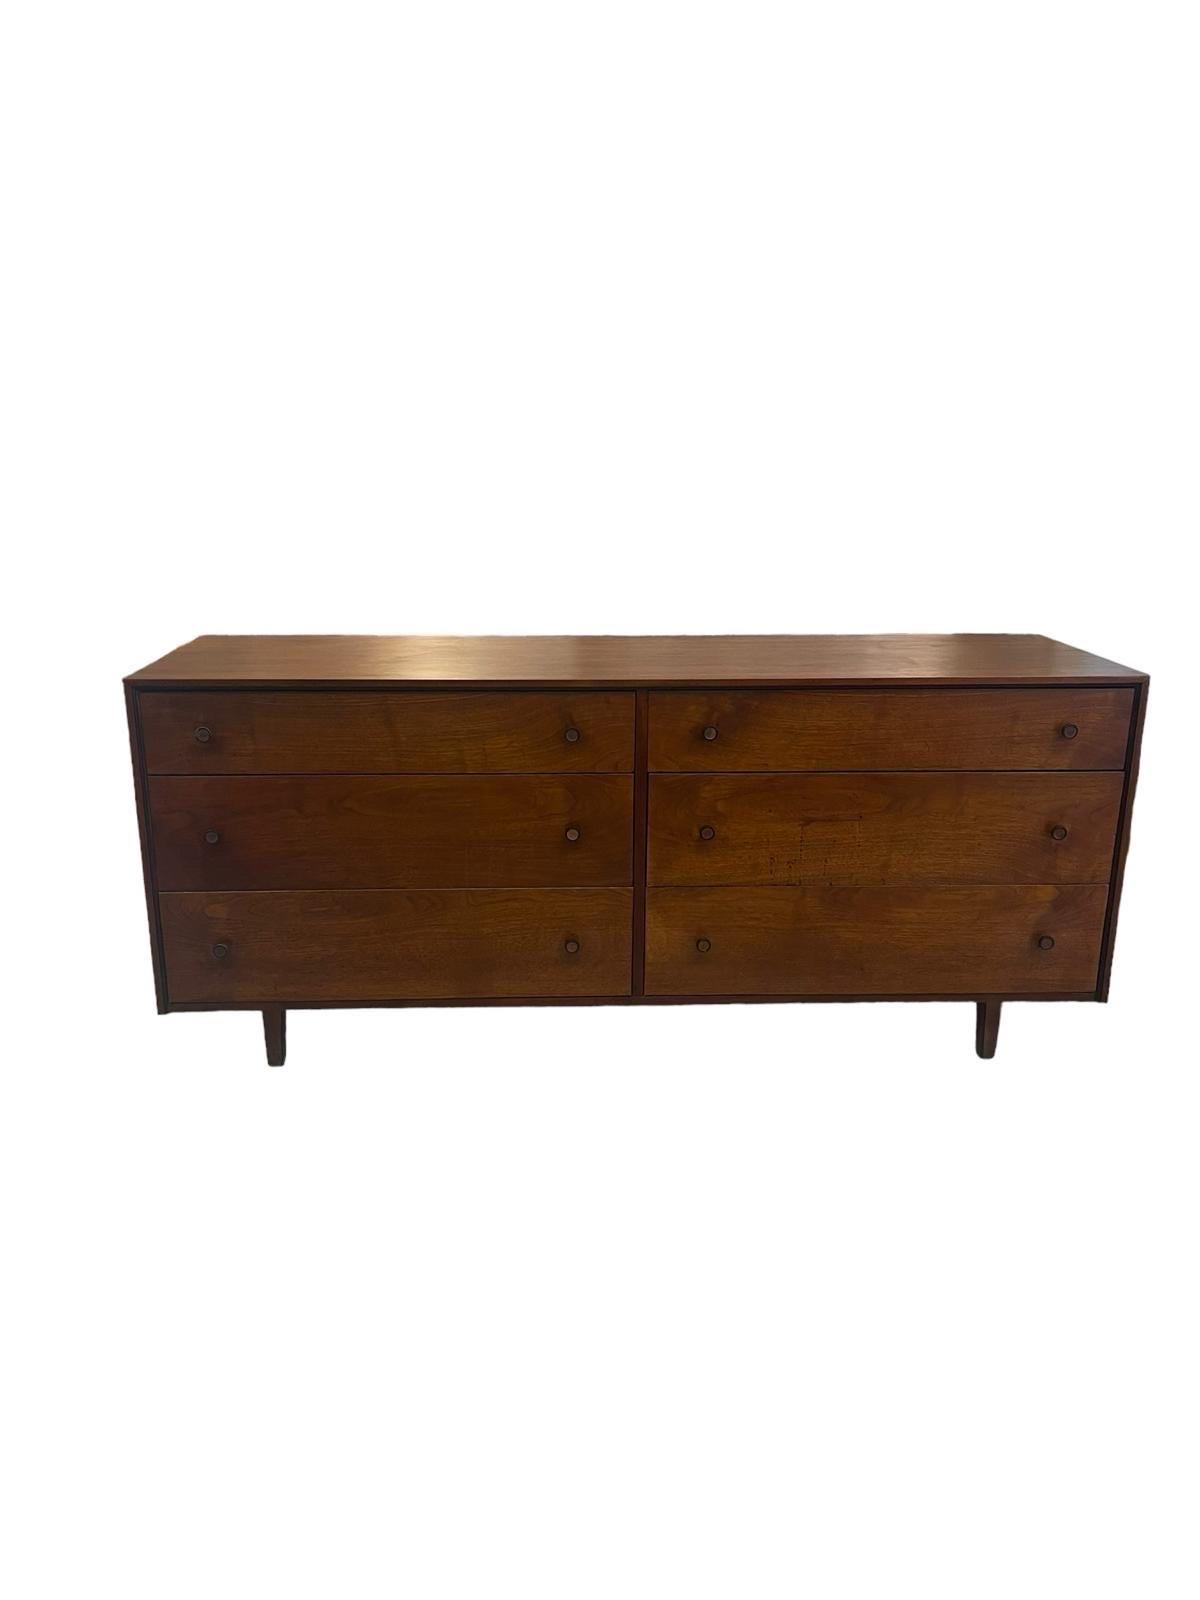 This Dresser features original wood and metal hardware. Dovetailed Drawers. The frame,handles and legs are accented with black line detailing as shown. Vintage Condition Consistent with Age as Pictured.

Dimensions. 65 W ; 18 1/2 D ; 28 H